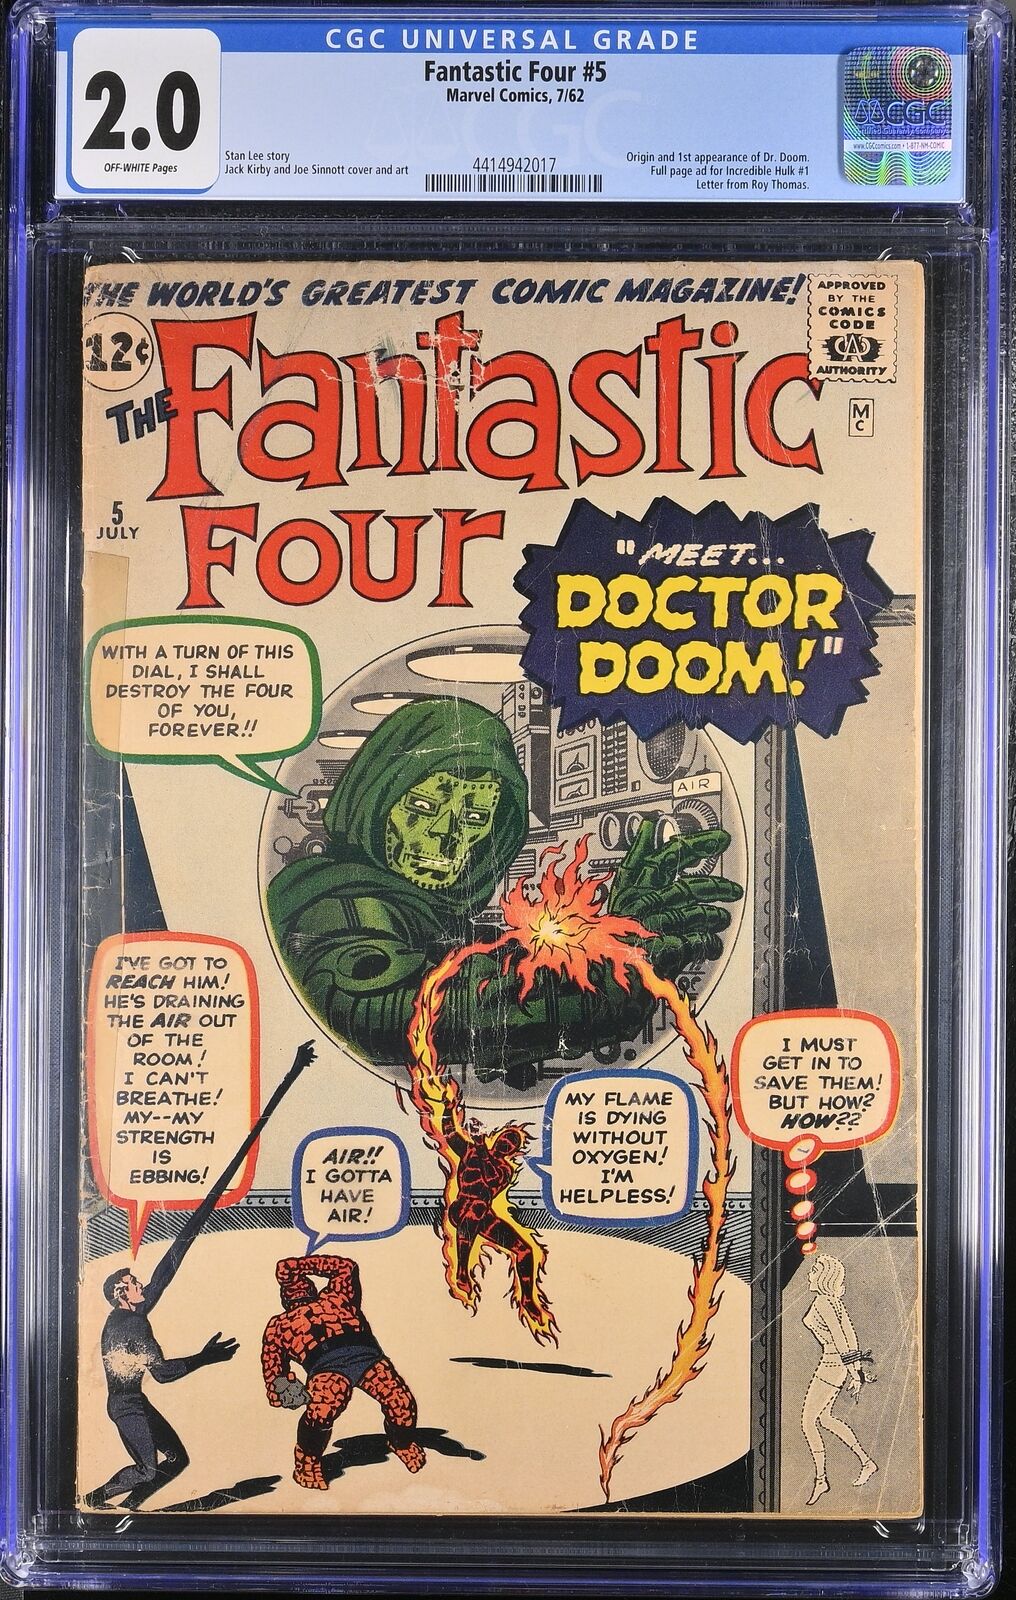 Fantastic Four #5 - Marvel Comics 1962 CGC 2.0 Origin and 1st appearance of Dr. 